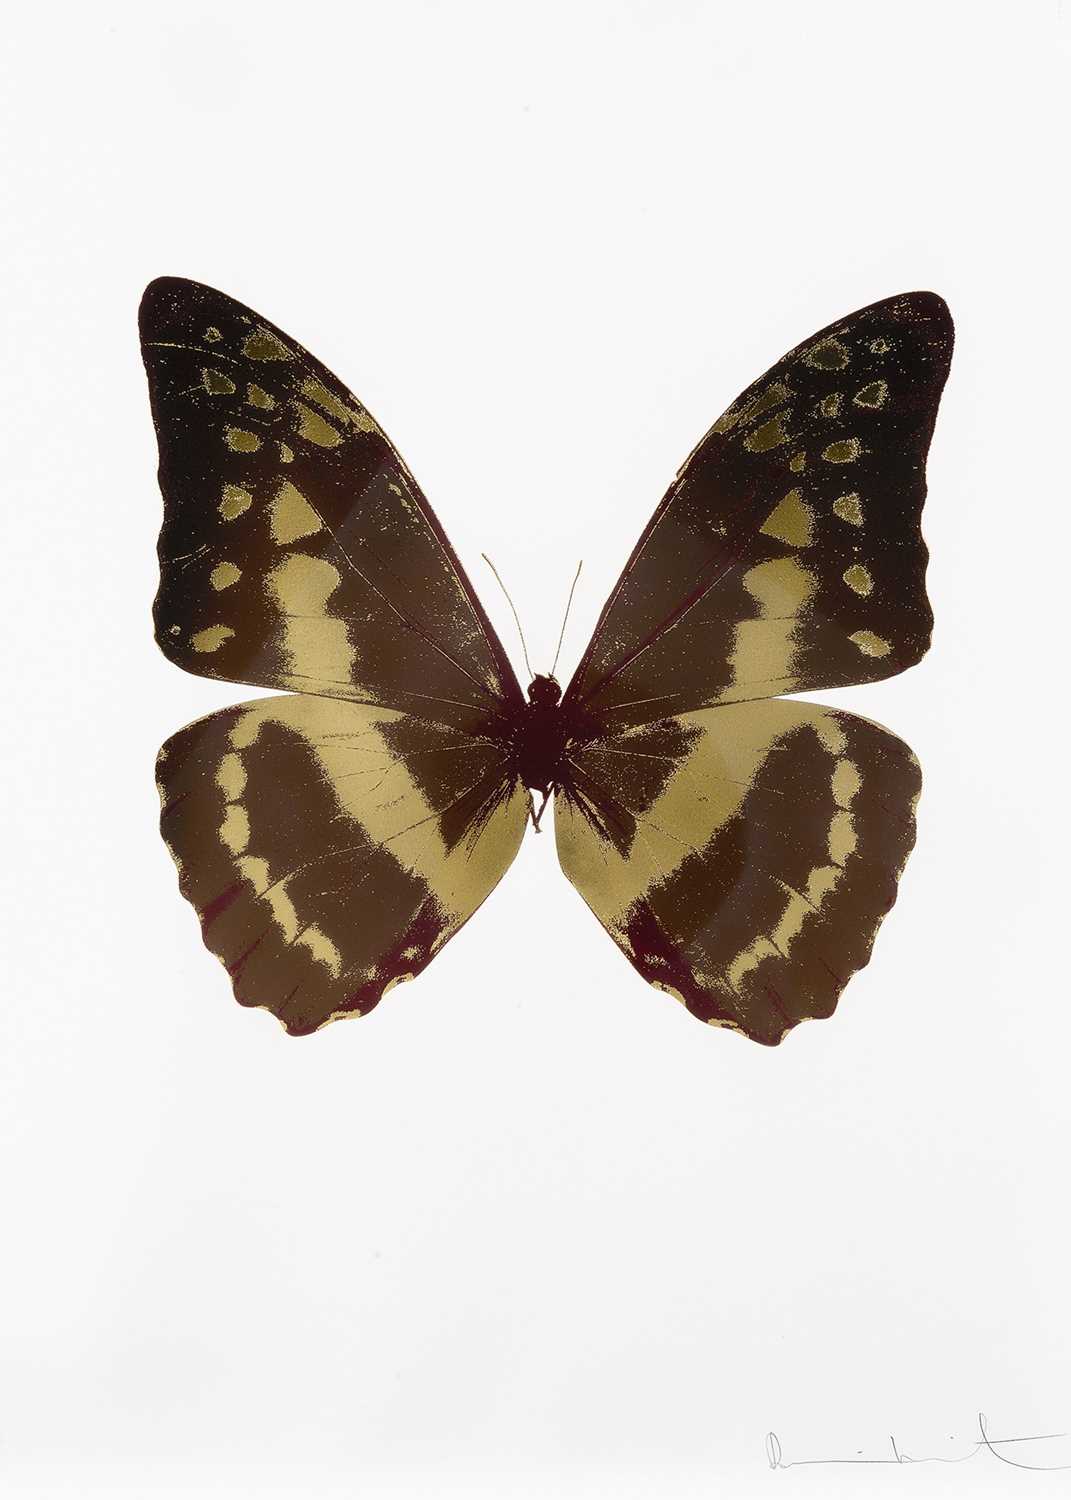 Lot 153 - Damien Hirst (British 1965-), 'The Souls III - Gunmetal/African Gold/Cool Gold', 2010